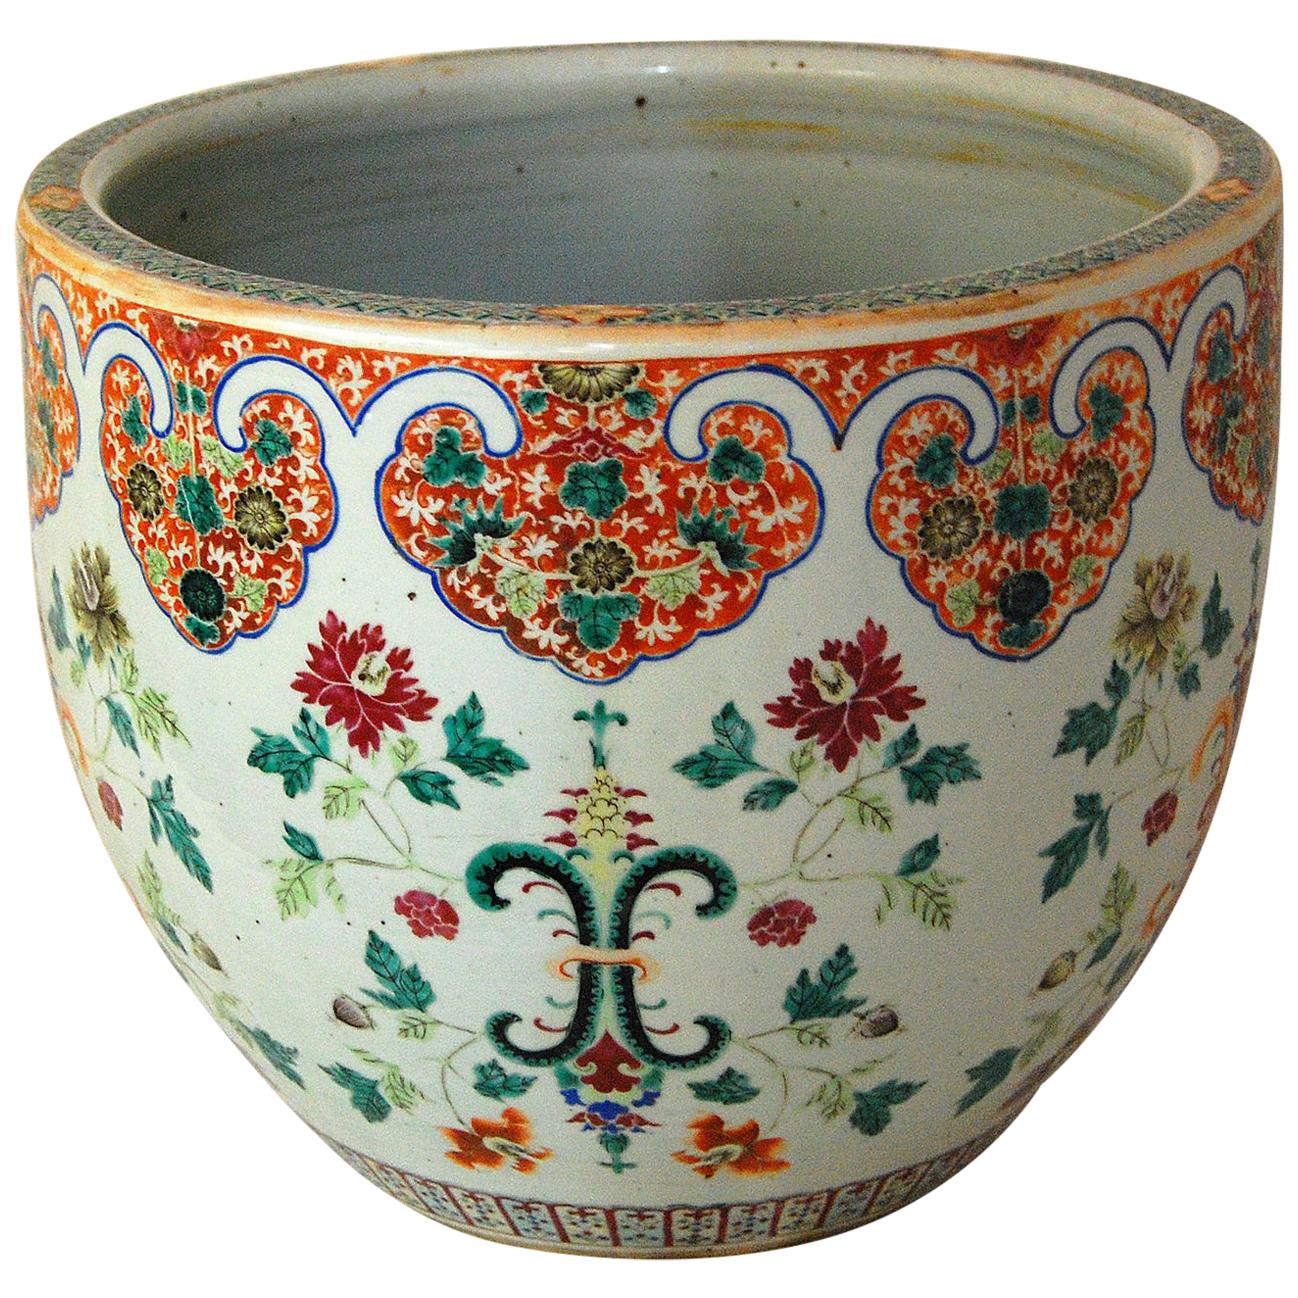 Chinese 19th Century Famille Verte Jardinière or Fishbowl with Floral Motifs